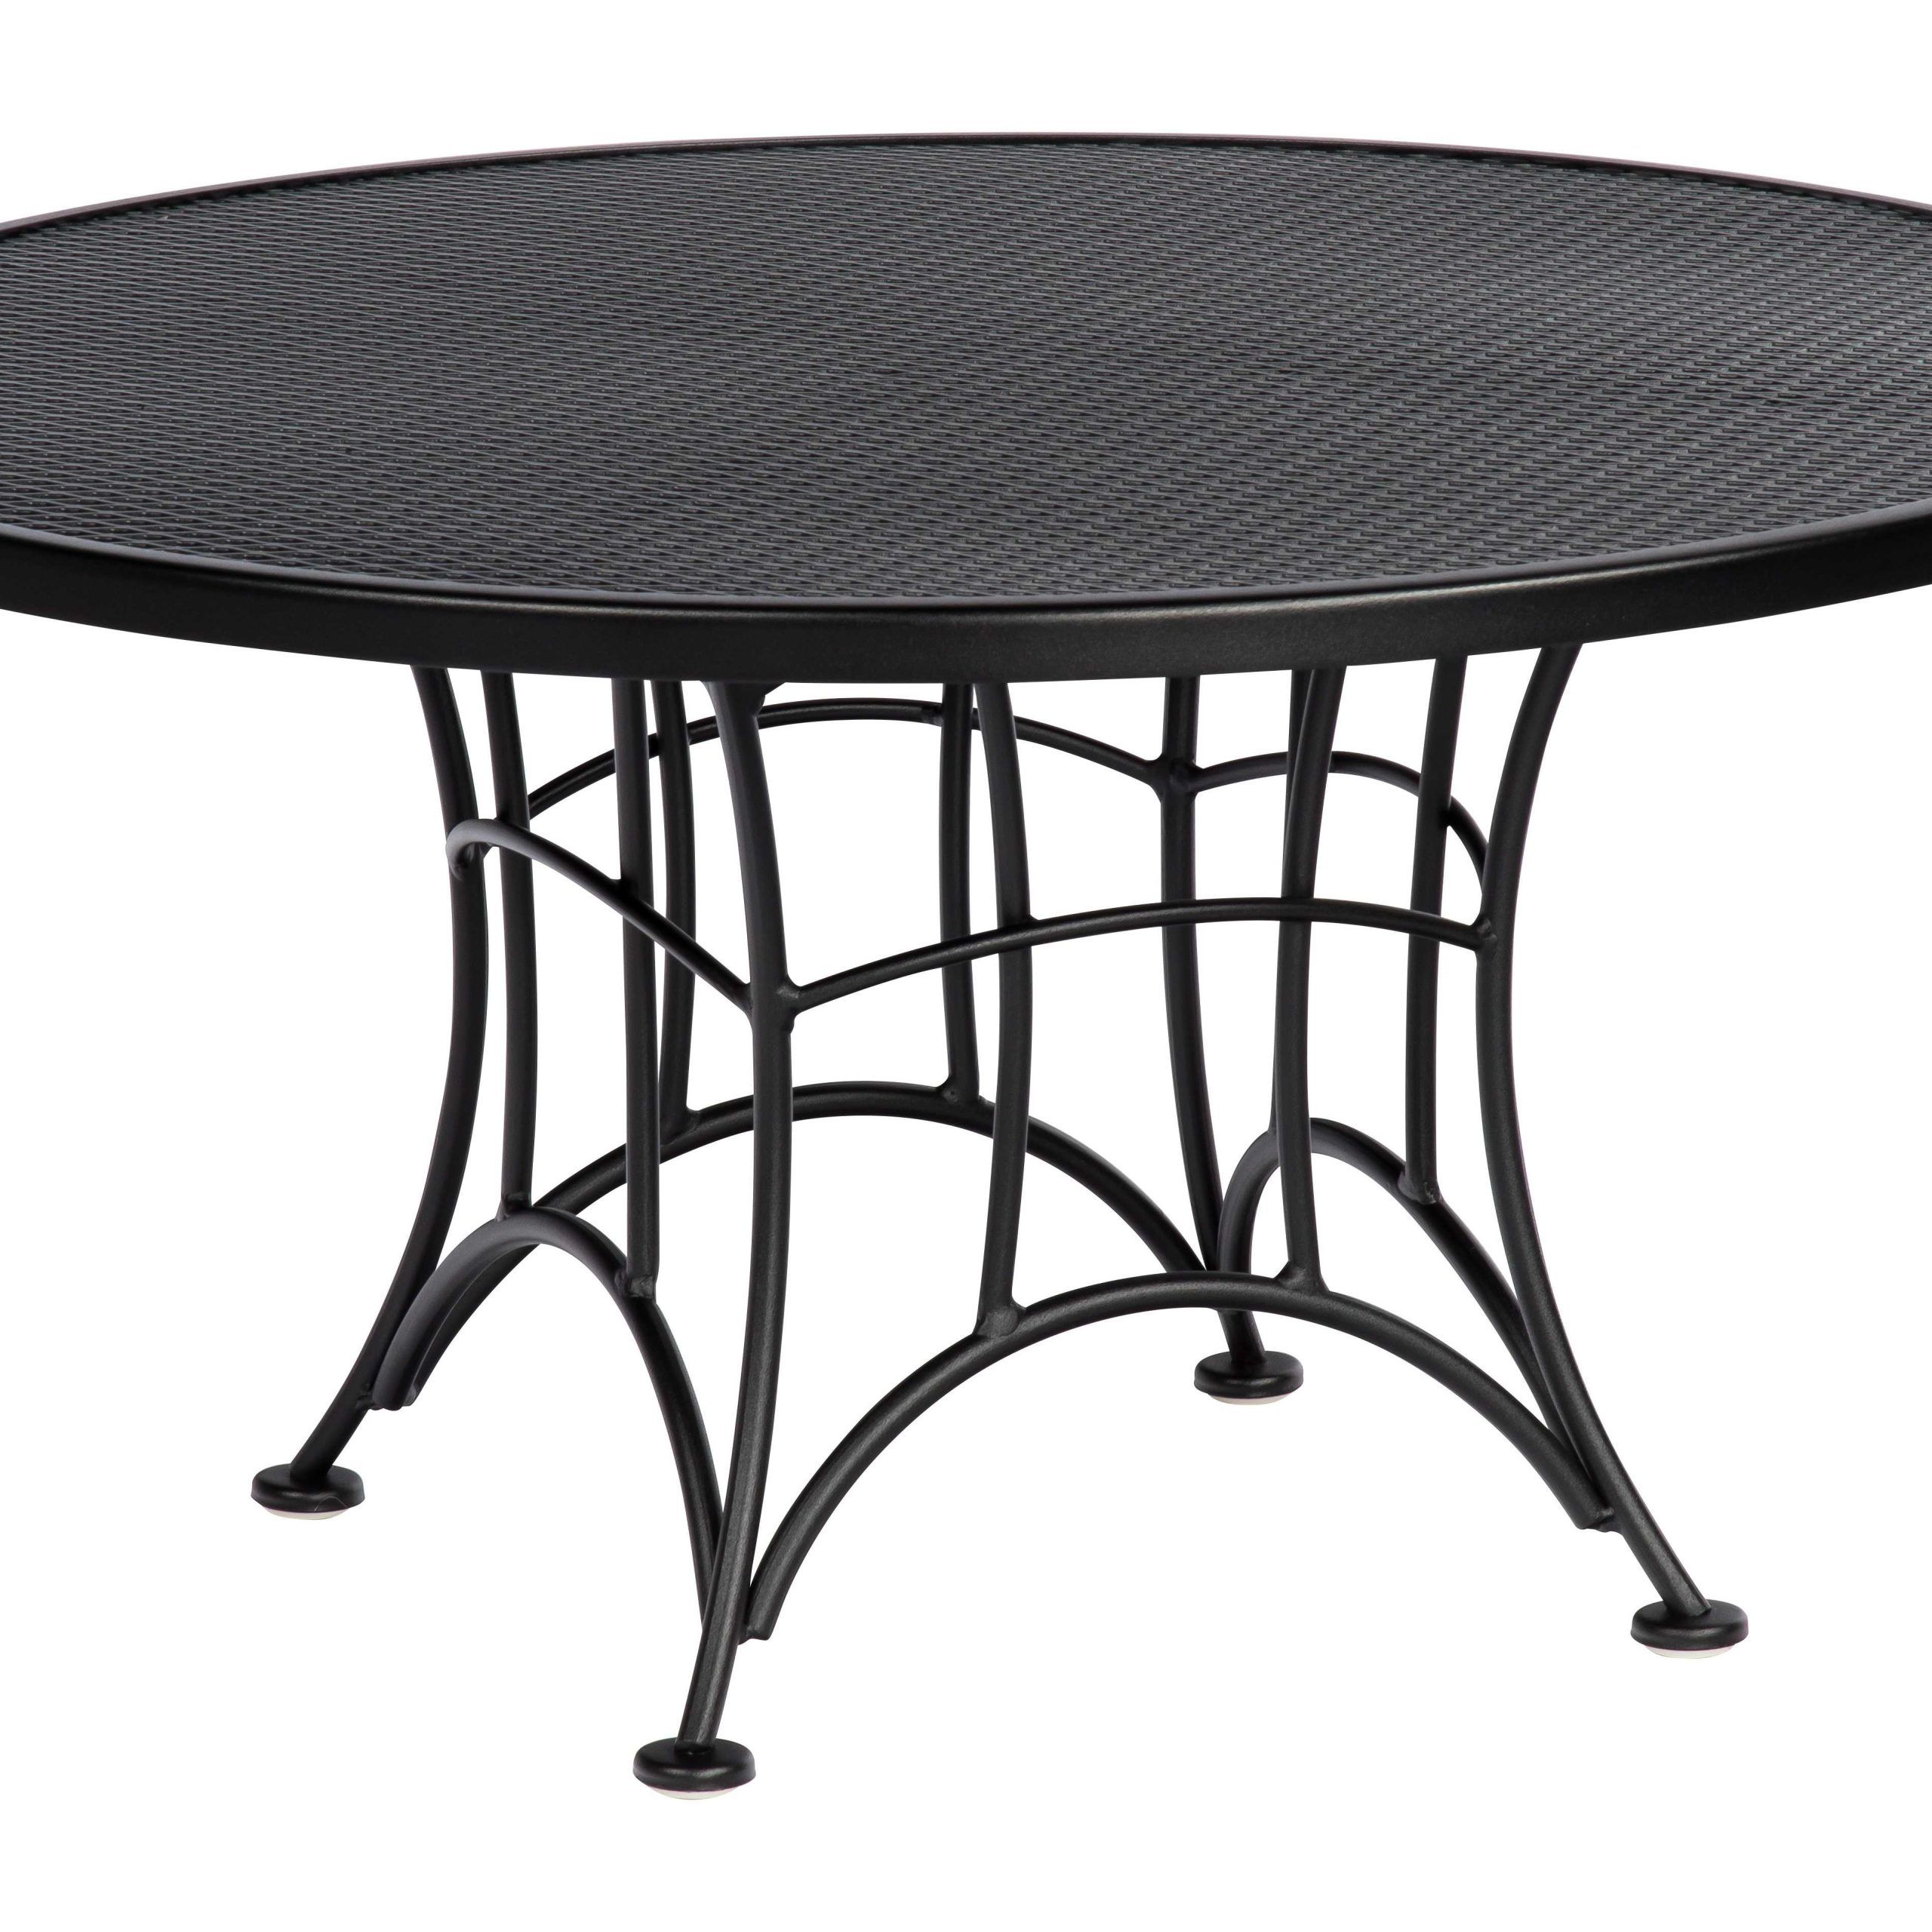 Woodard Hamilton Wrought Iron Coffee Table | 6k0038 In Round Steel Patio Coffee Tables (View 7 of 20)